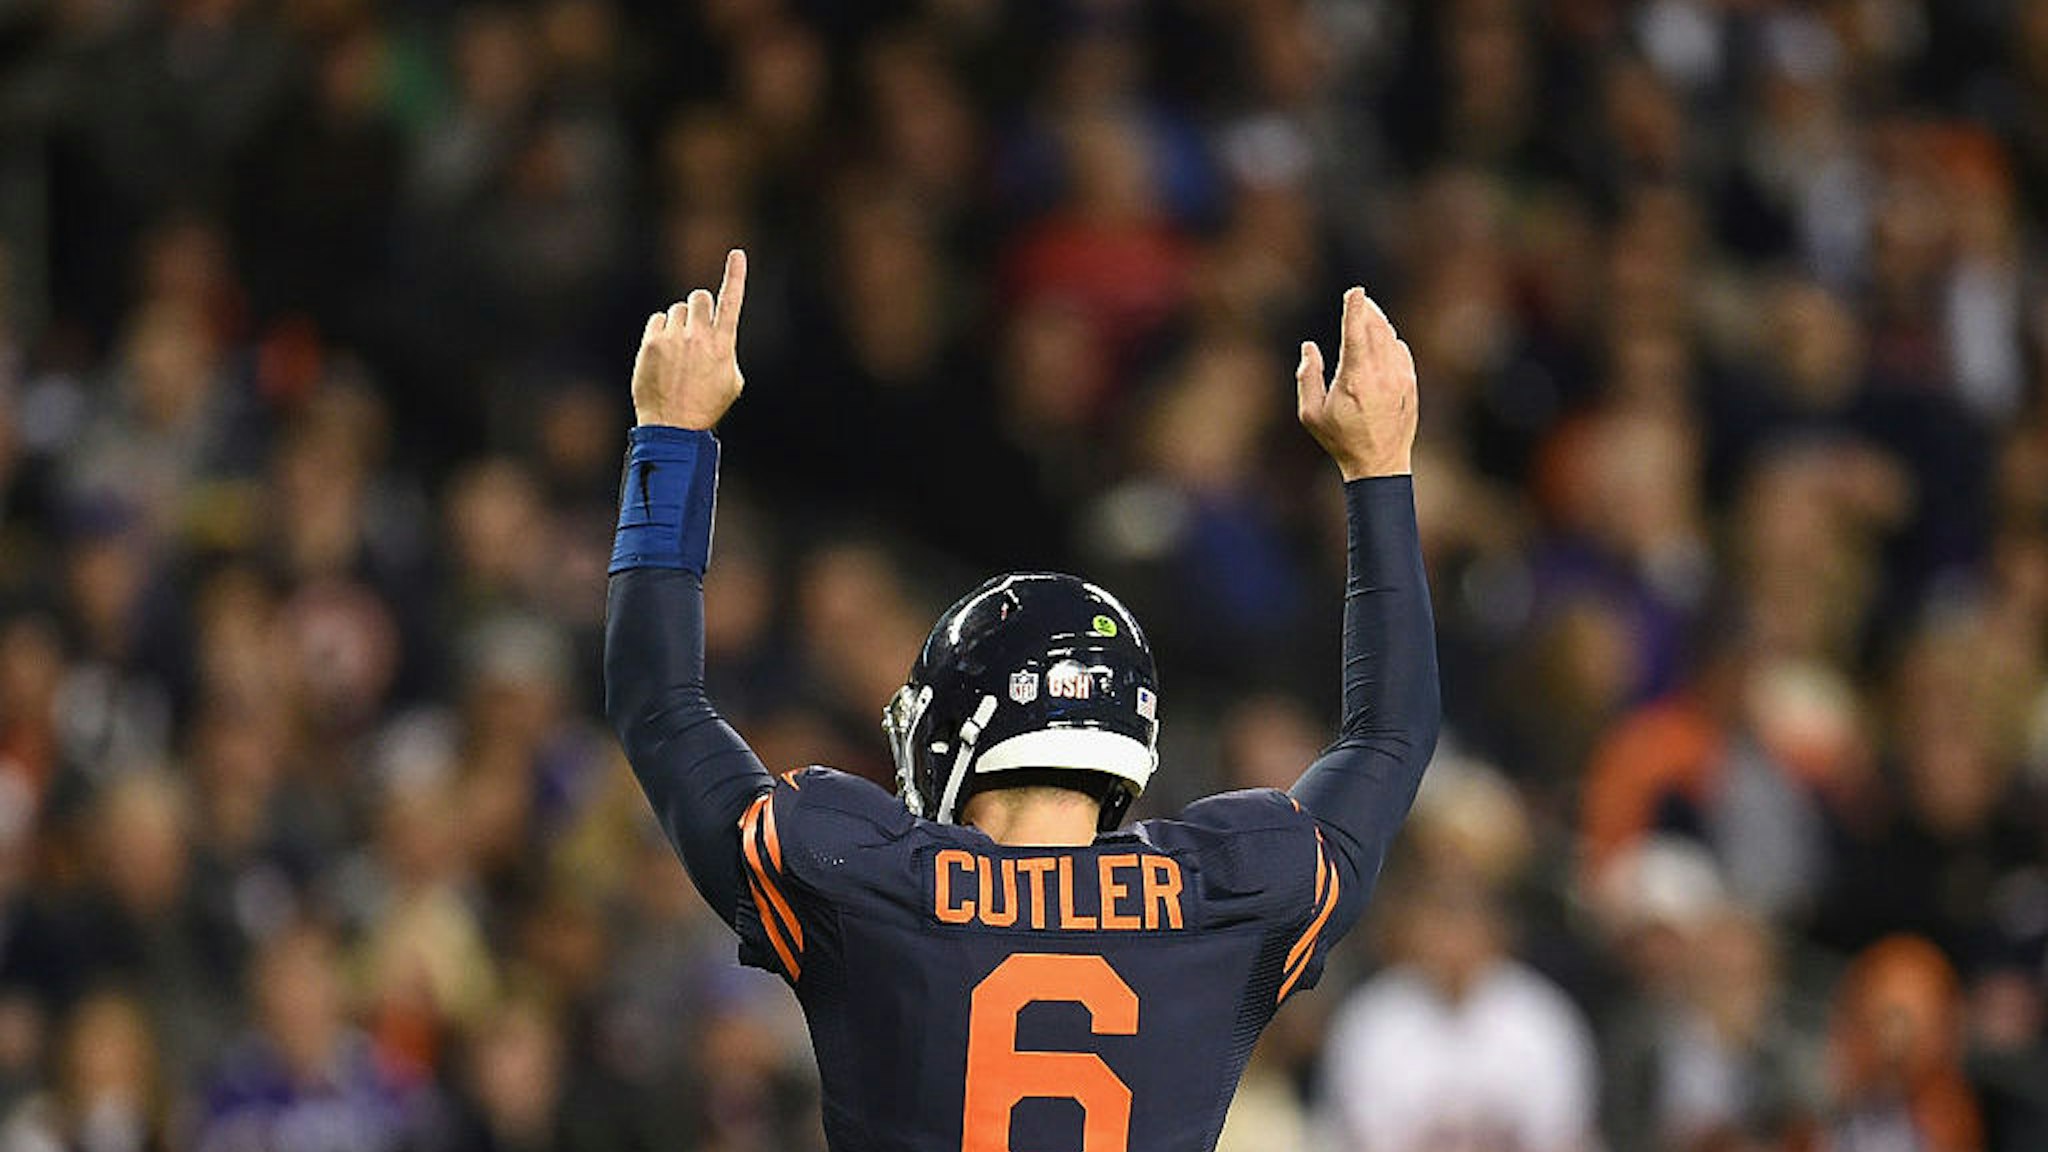 CHICAGO, IL - OCTOBER 31: Jay Cutler #6 of the Chicago Bears celebrates after a touchdown by Jordan Howard #24 (not pictured) during the second quarter against the Minnesota Vikings at Soldier Field on October 31, 2016 in Chicago, Illinois. (Photo by Stacy Revere/Getty Images)